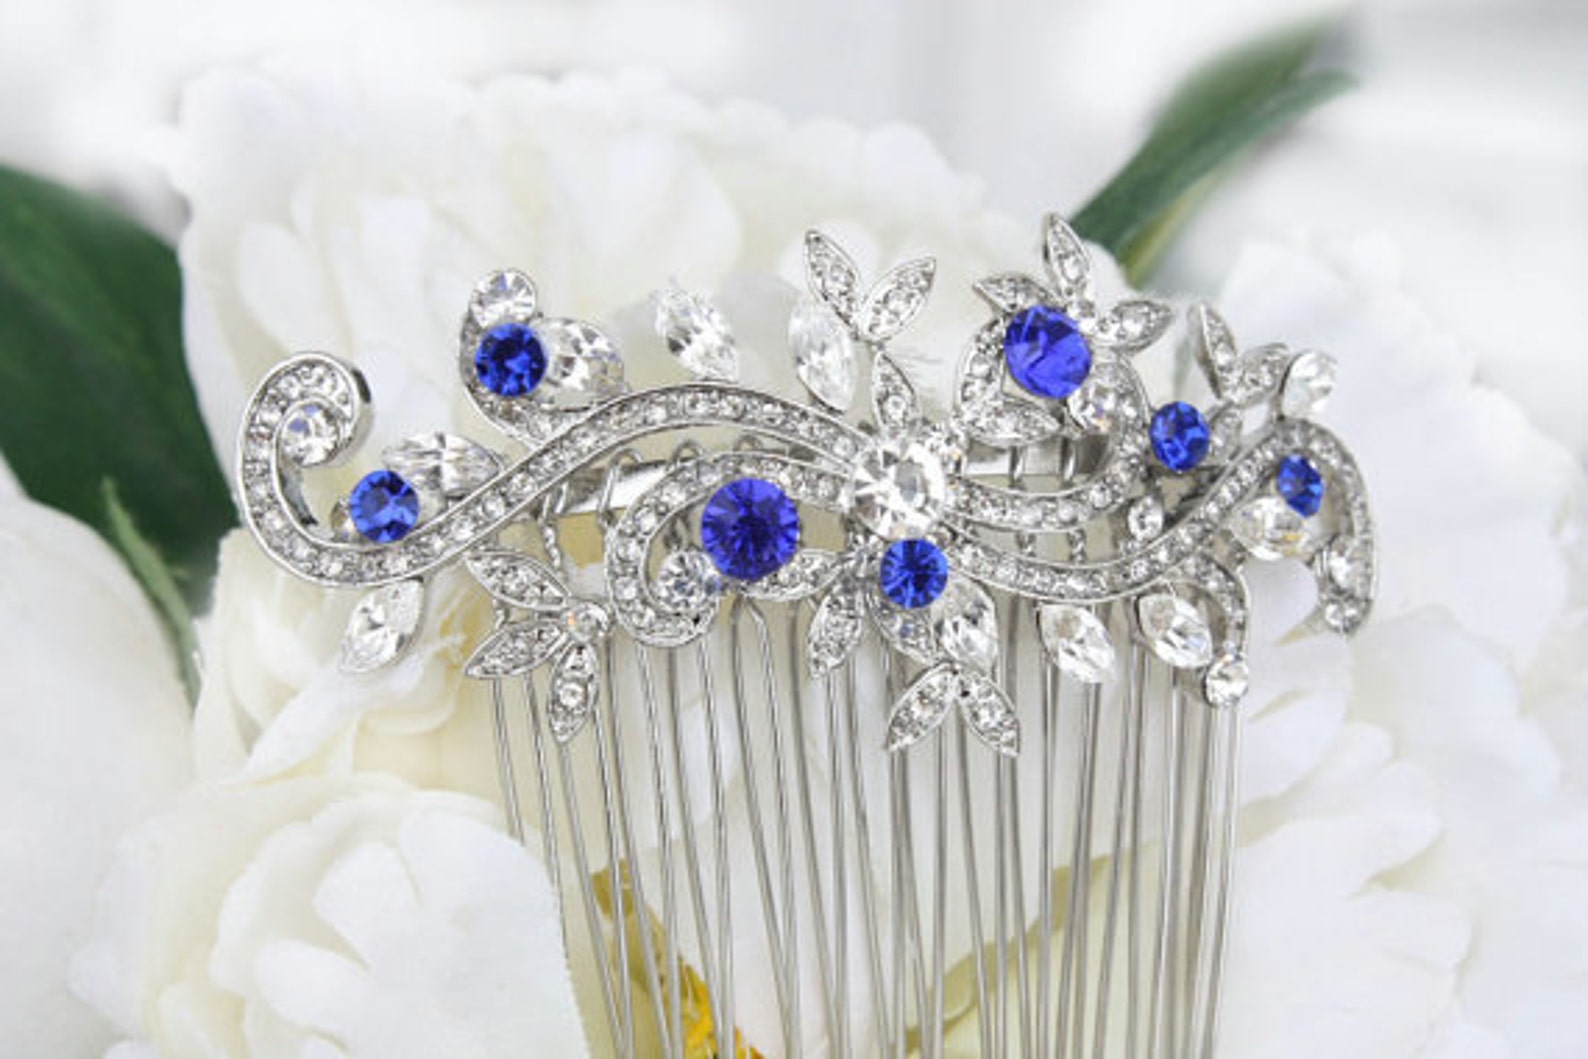 10. Sapphire Blue Hair Comb for Bridesmaids - wide 6